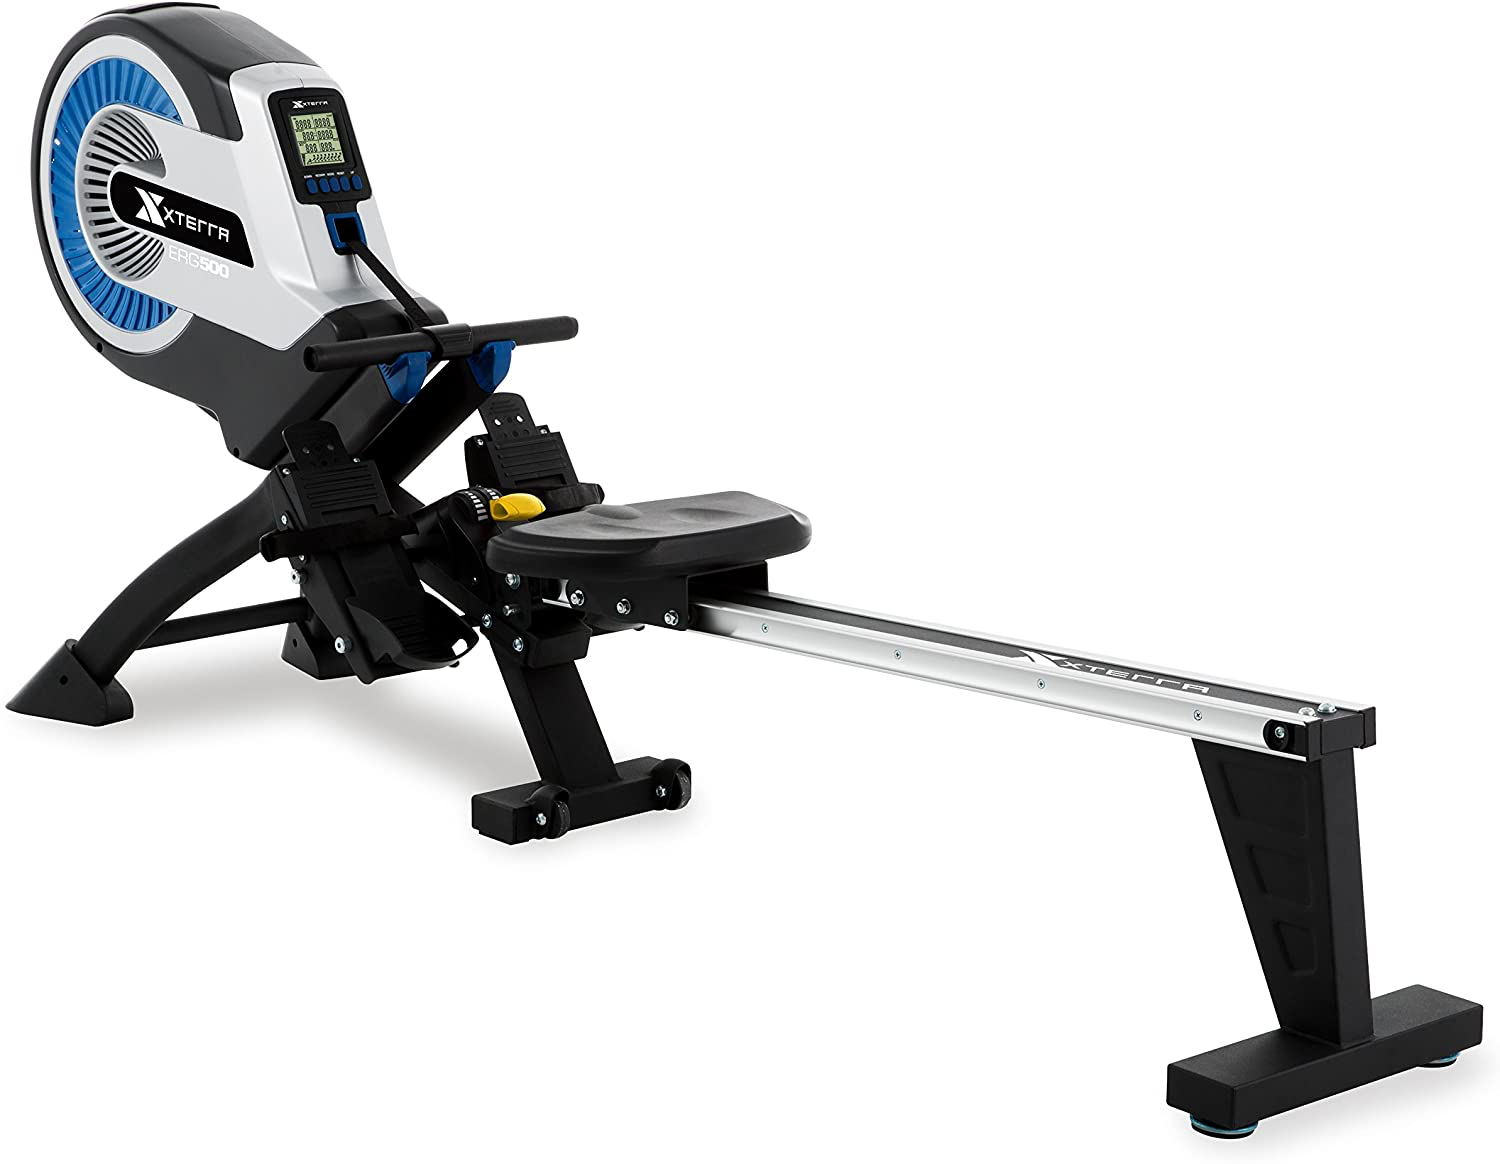 Best Value Rowing Machine For Home Use